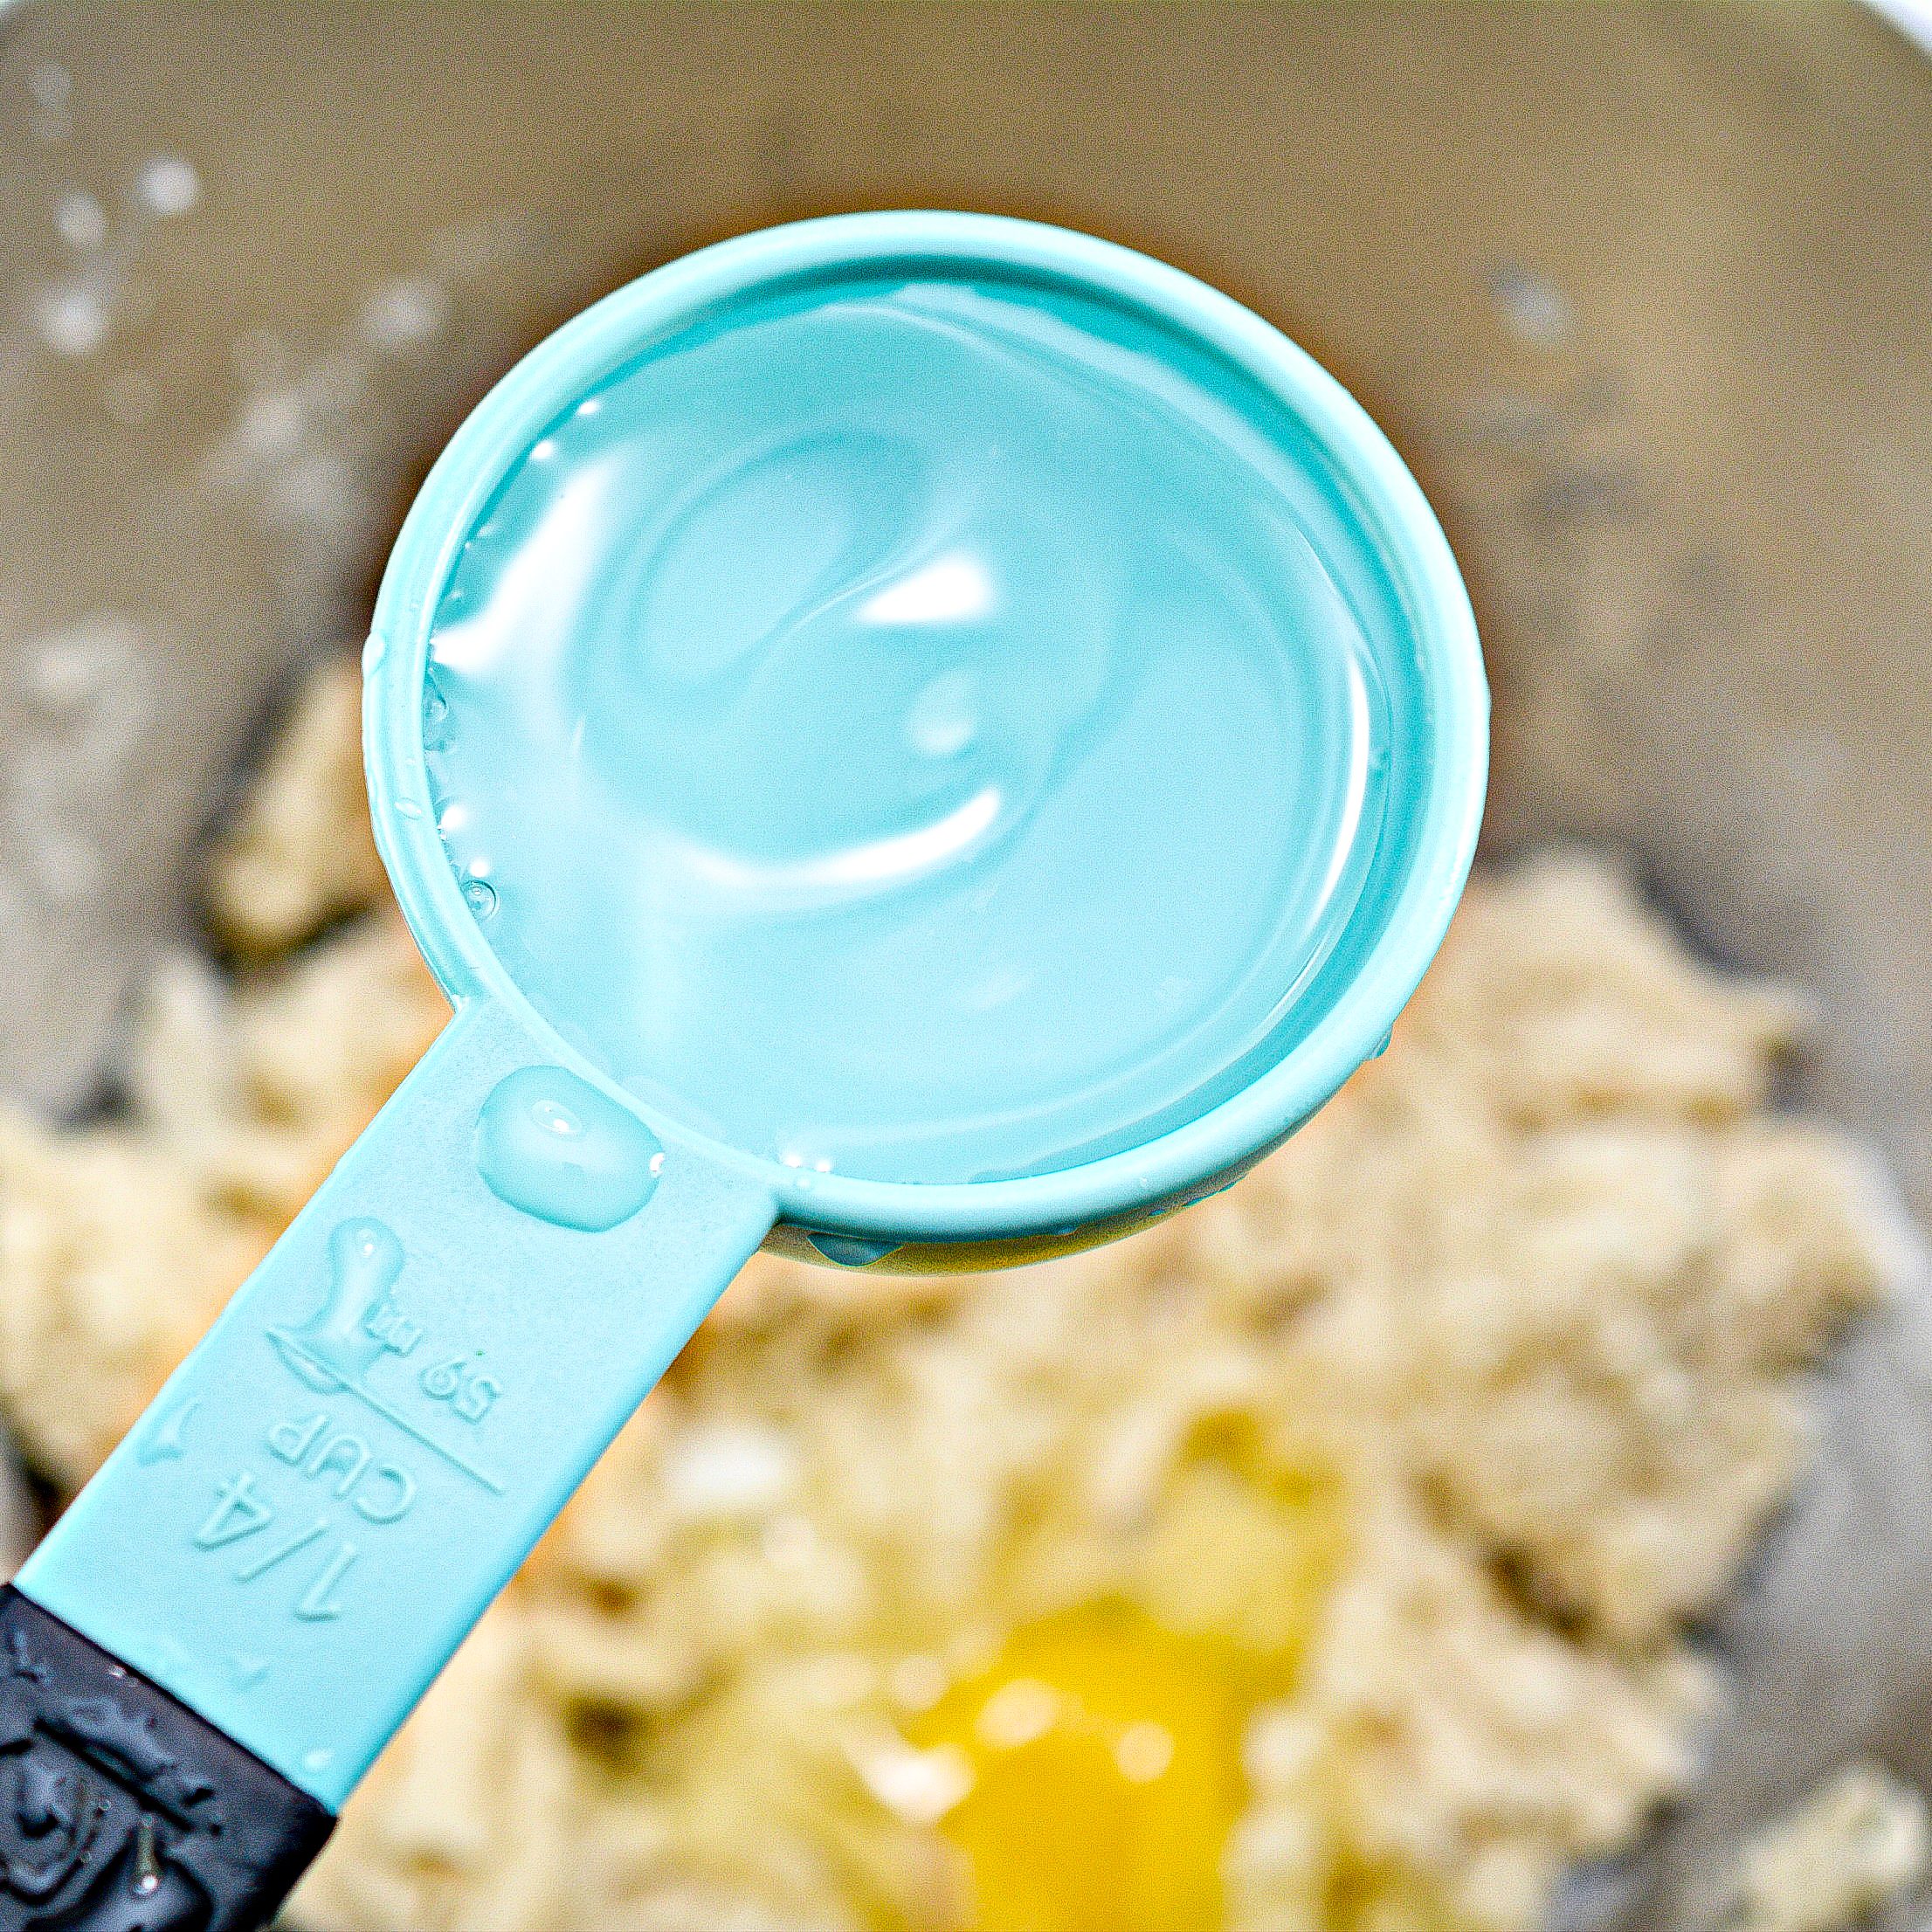 Add the water and egg to the mixing bowl and beat on high until well combined.